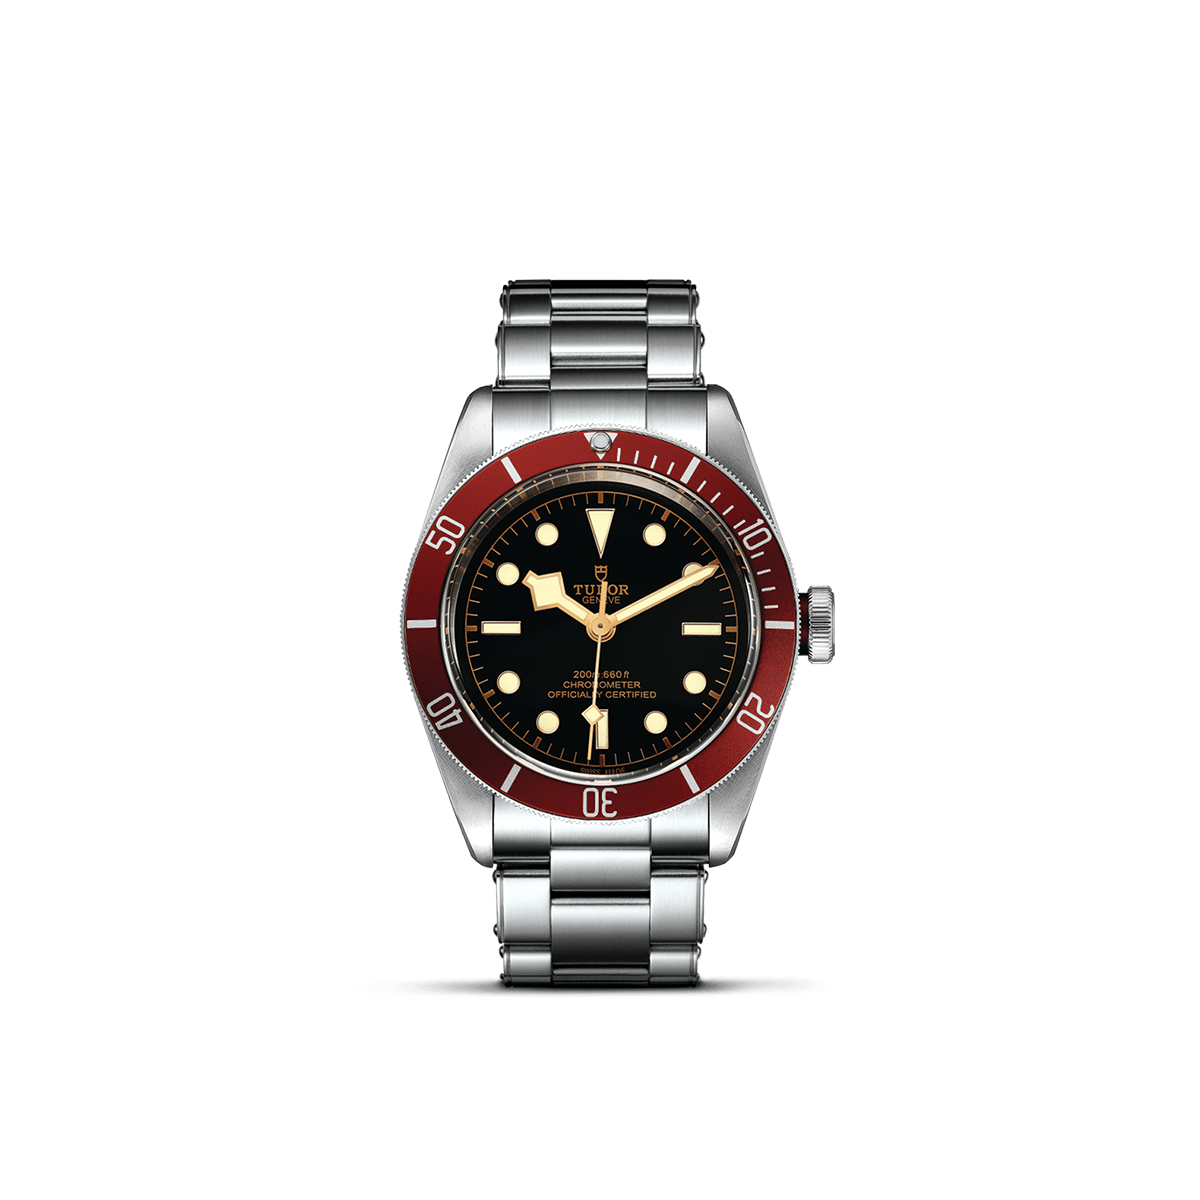 TUDOR now available for home delivery